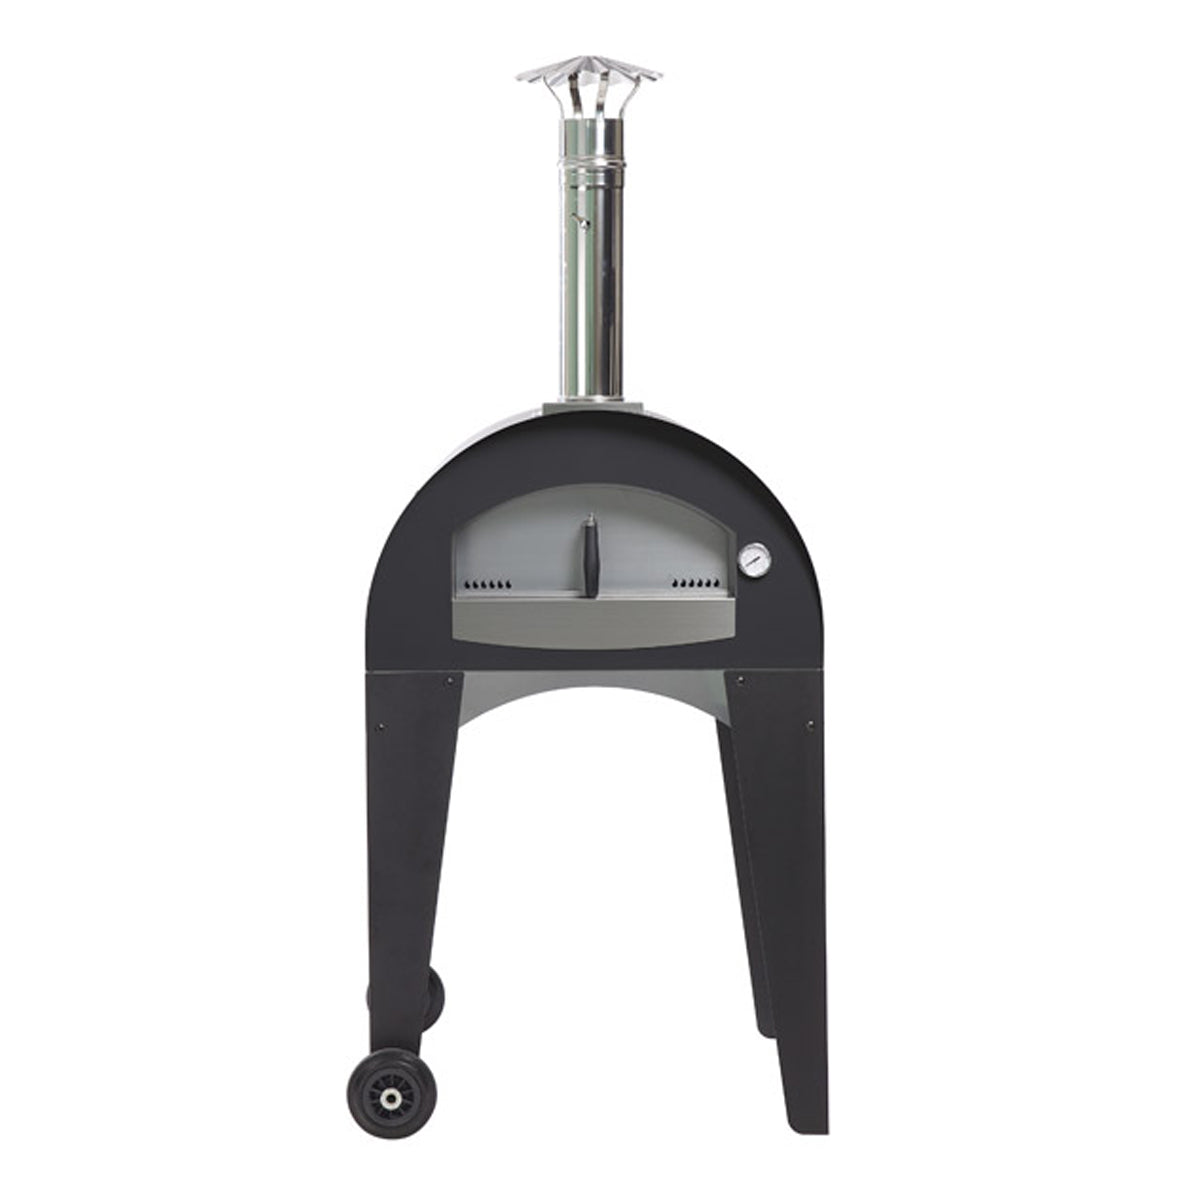 Fontana Ischia Wood Burning Pizza Oven and Trolley